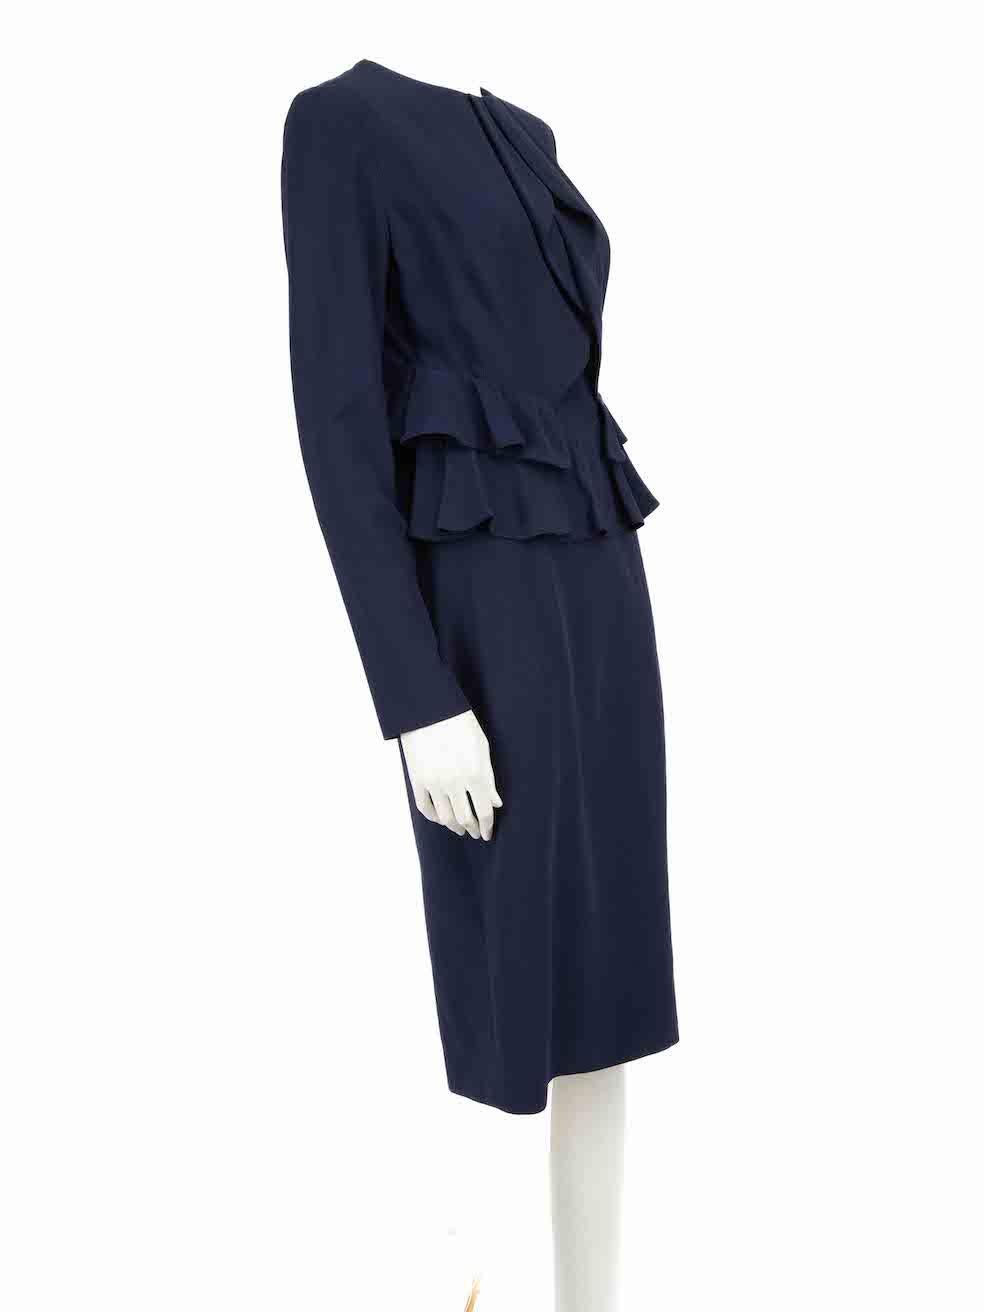 CONDITION is Very good. Minimal wear to dress is evident. Minimal wear to the bust with a small pluck to the weave on this used Alexander McQueen designer resale item.
 
 
 
 Details
 
 
 A/W14
 
 Navy
 
 Synthetic
 
 Dress
 
 Long sleeves
 
 Midi
